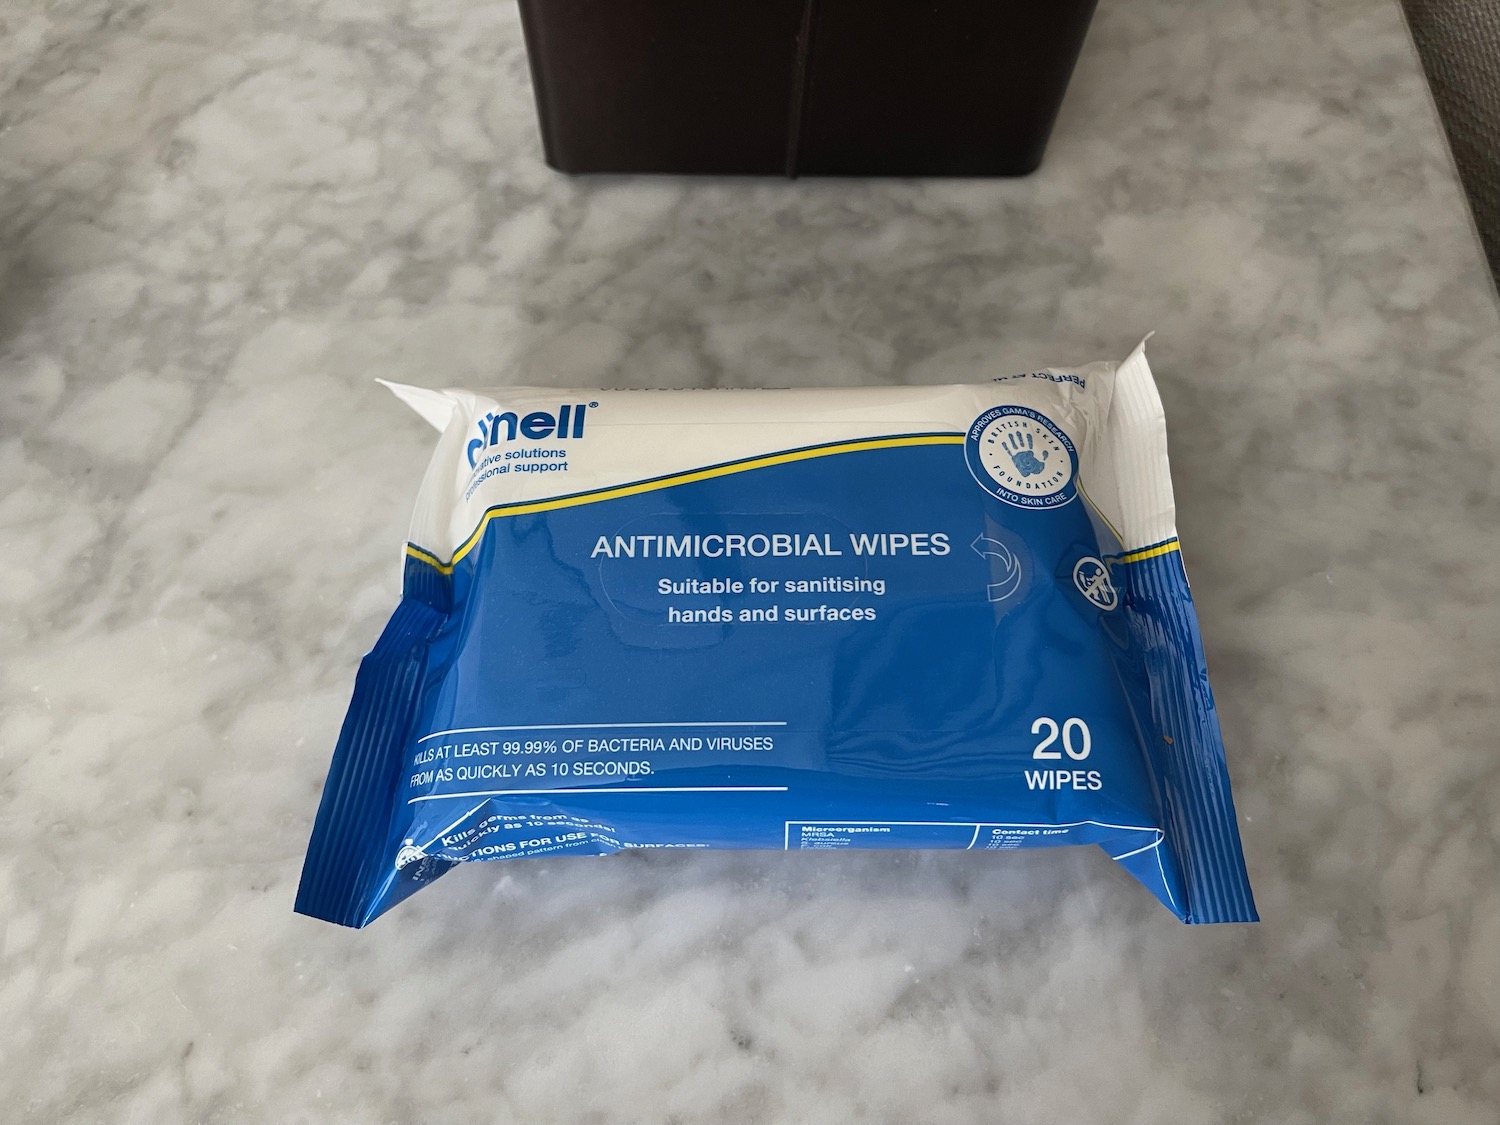 a package of antimicrobial wipes